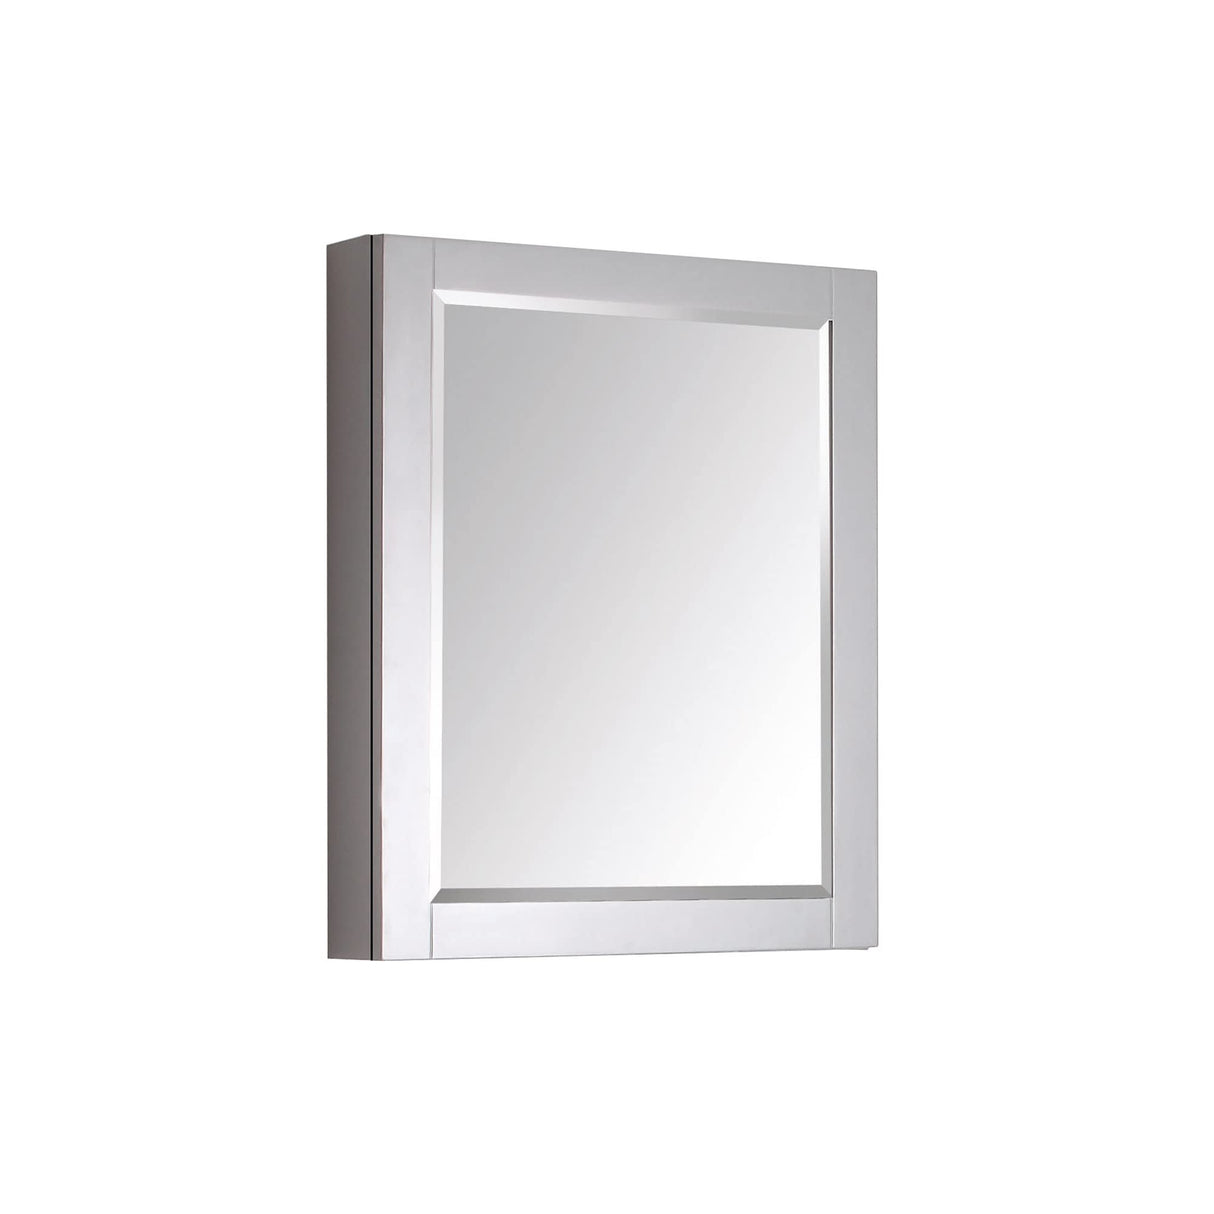 Avanity 24 in. Mirror Cabinet in Chilled Gray finish